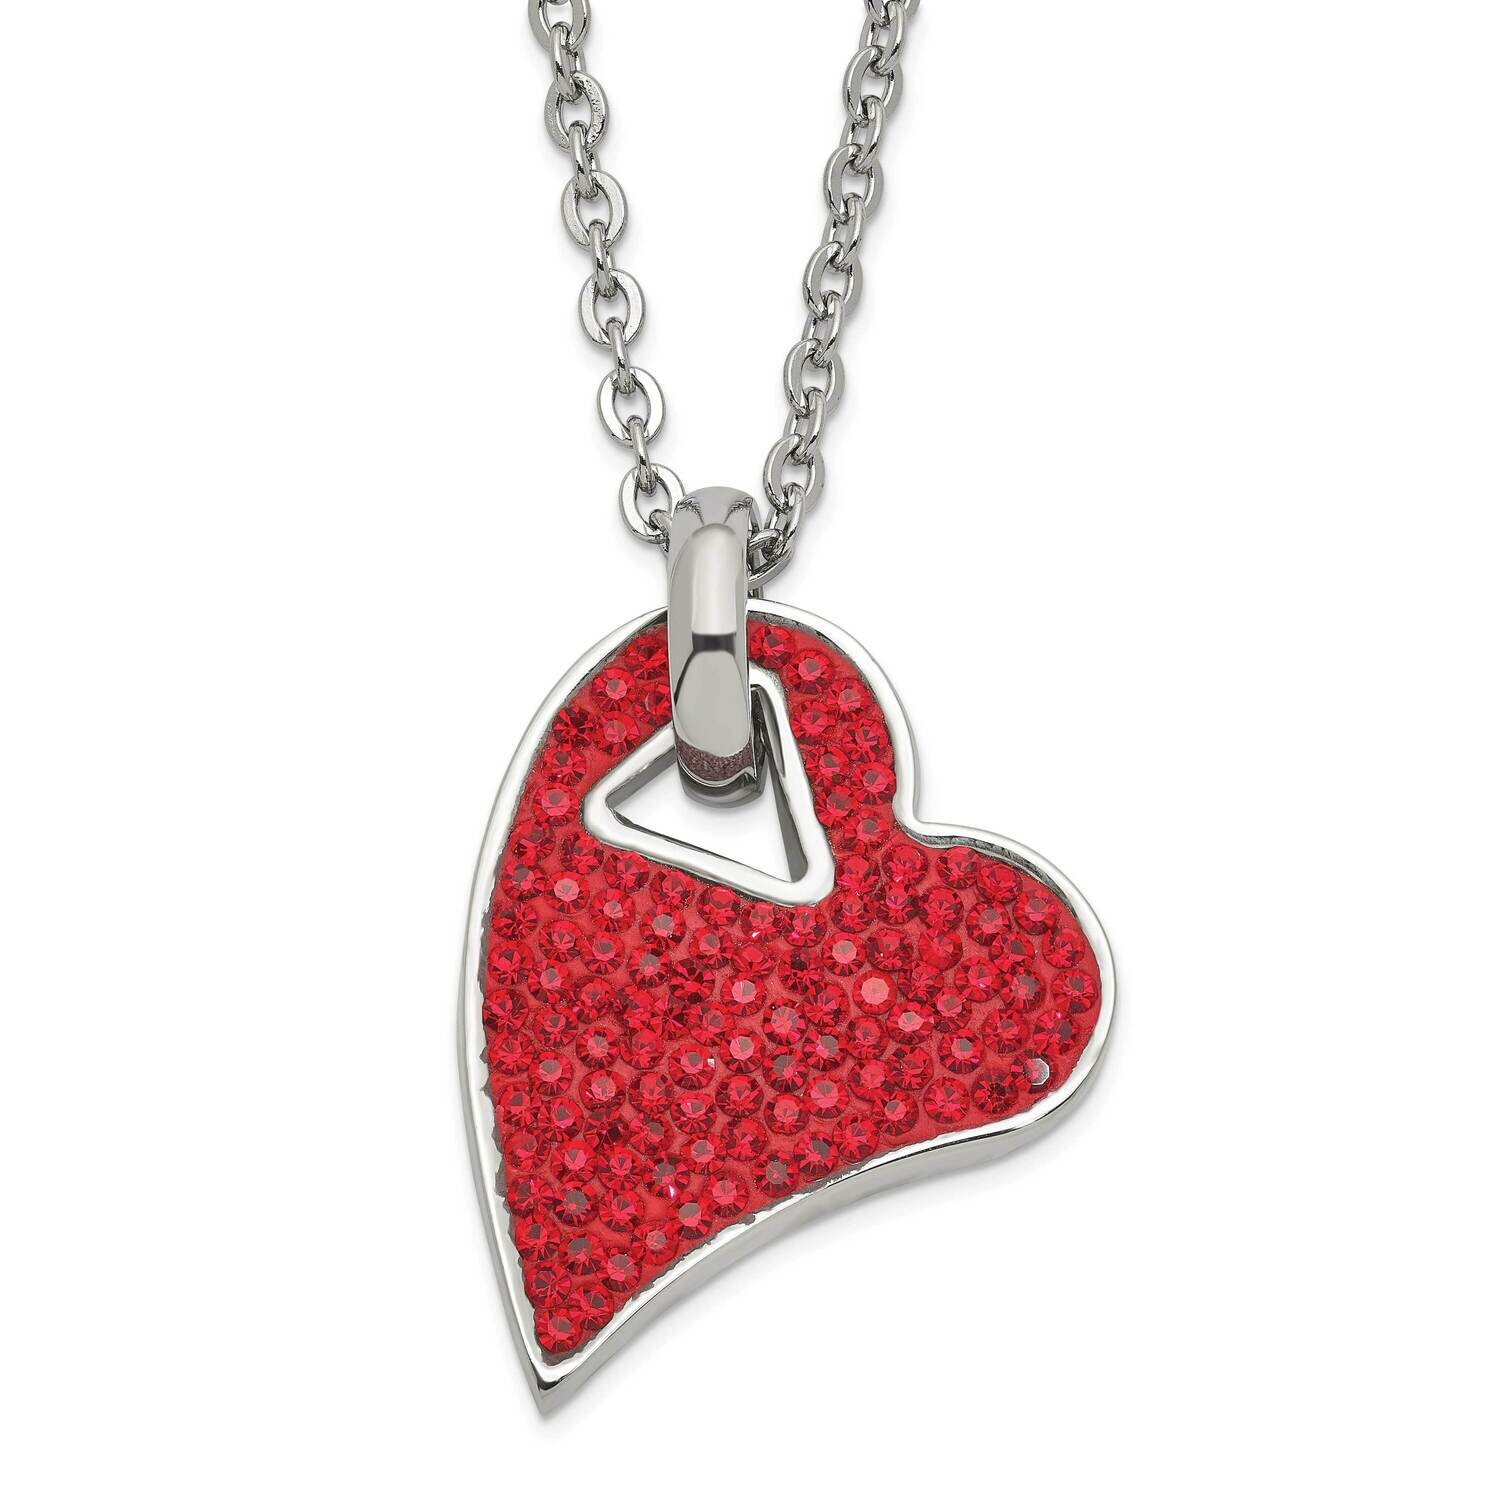 Red Crystal Heart Pendant Necklace Stainless Steel SRN787-20